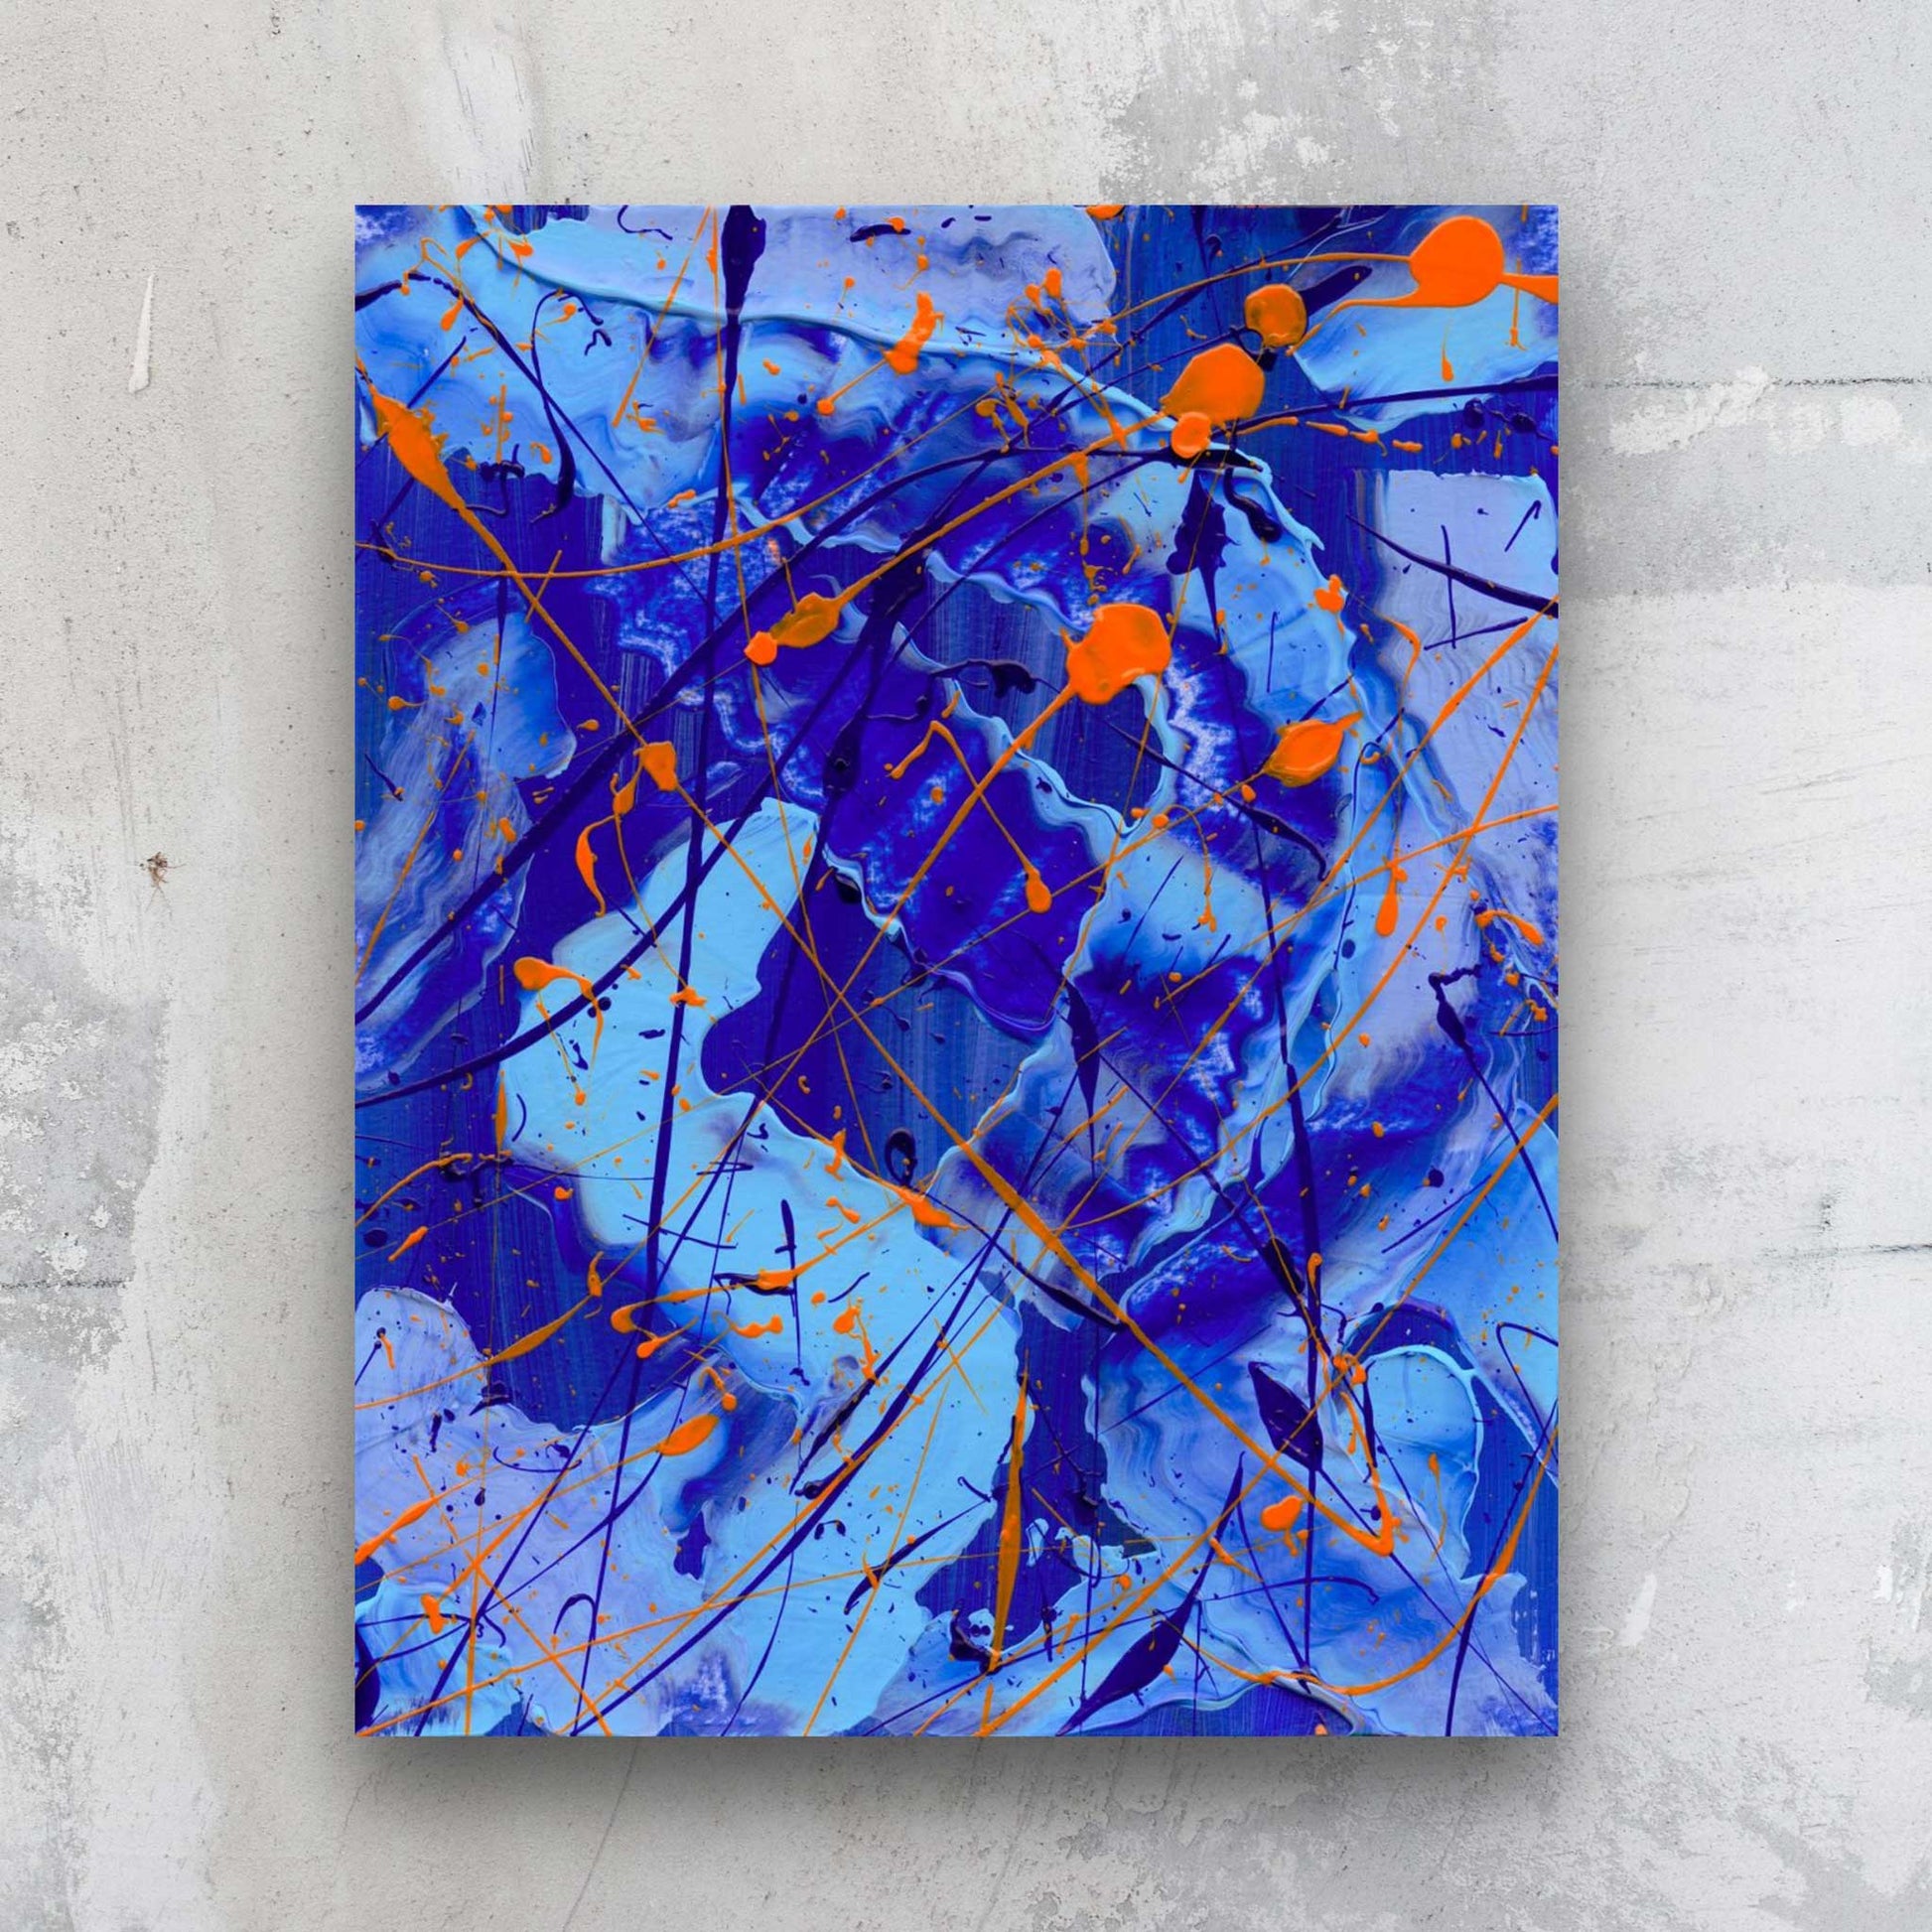 Blue I, original bold abstract in blues and neons by Bridget Bradley, seen hanging on stone wall